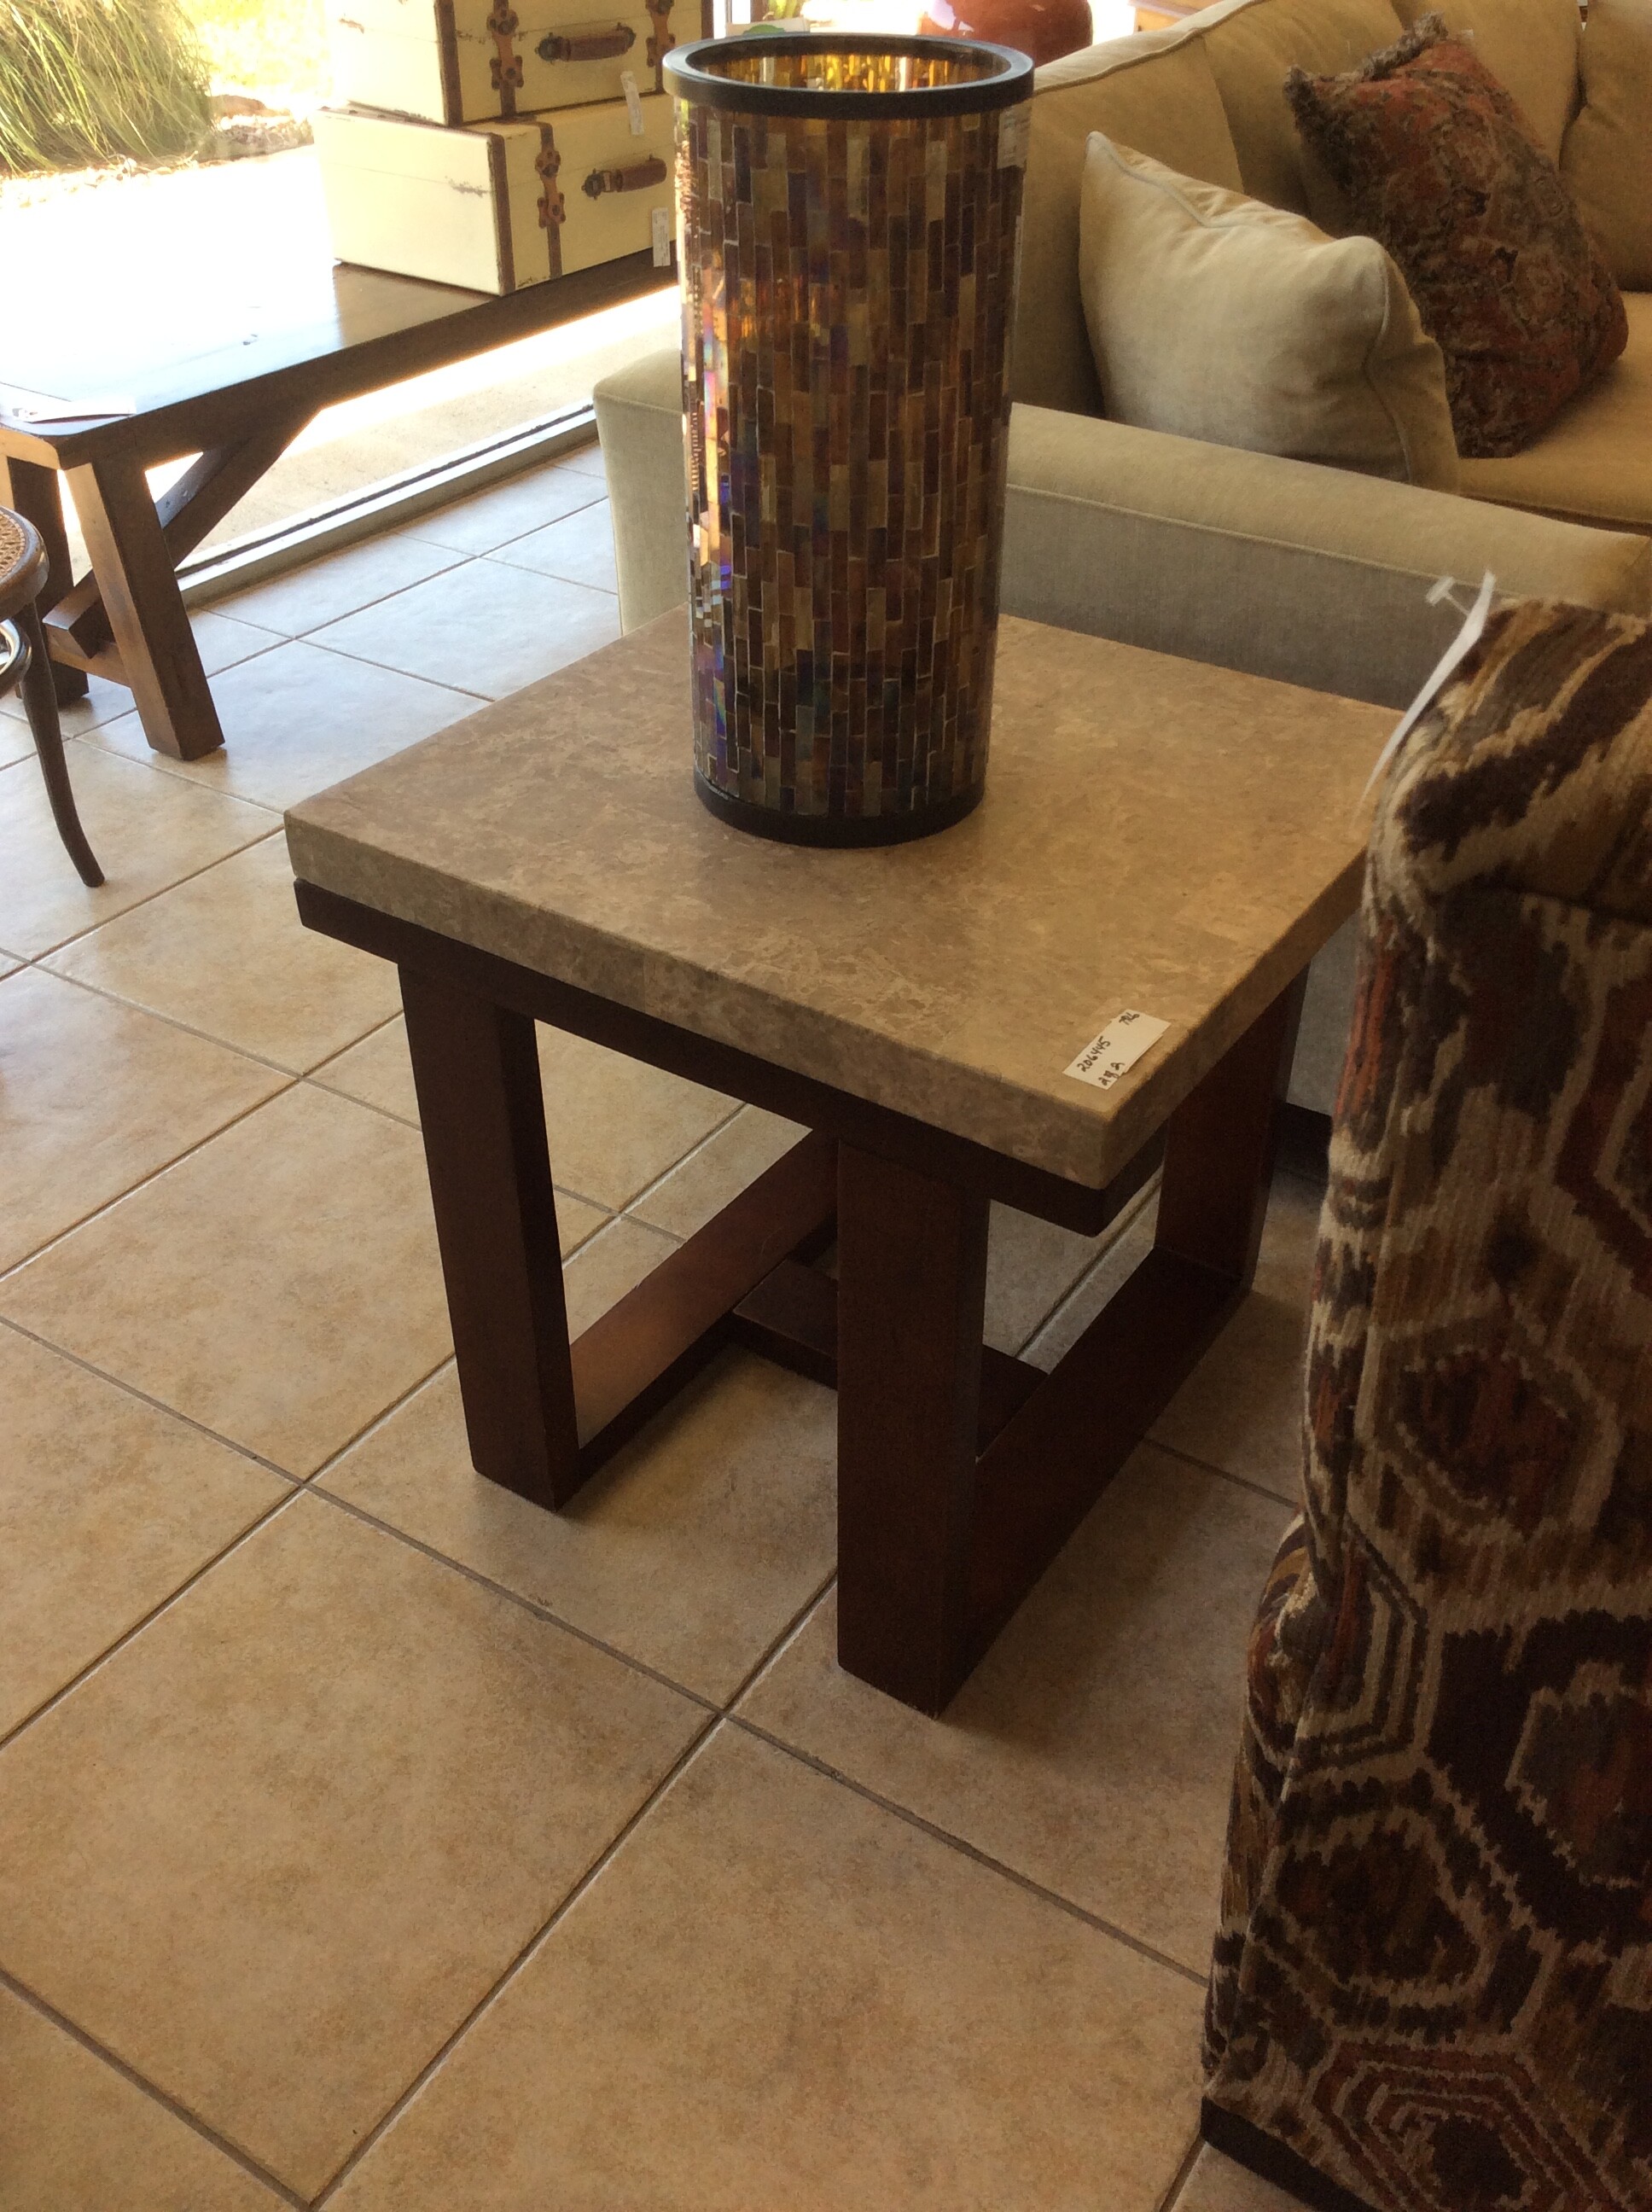 This is a pair of light marble end tables with a wood bottom.